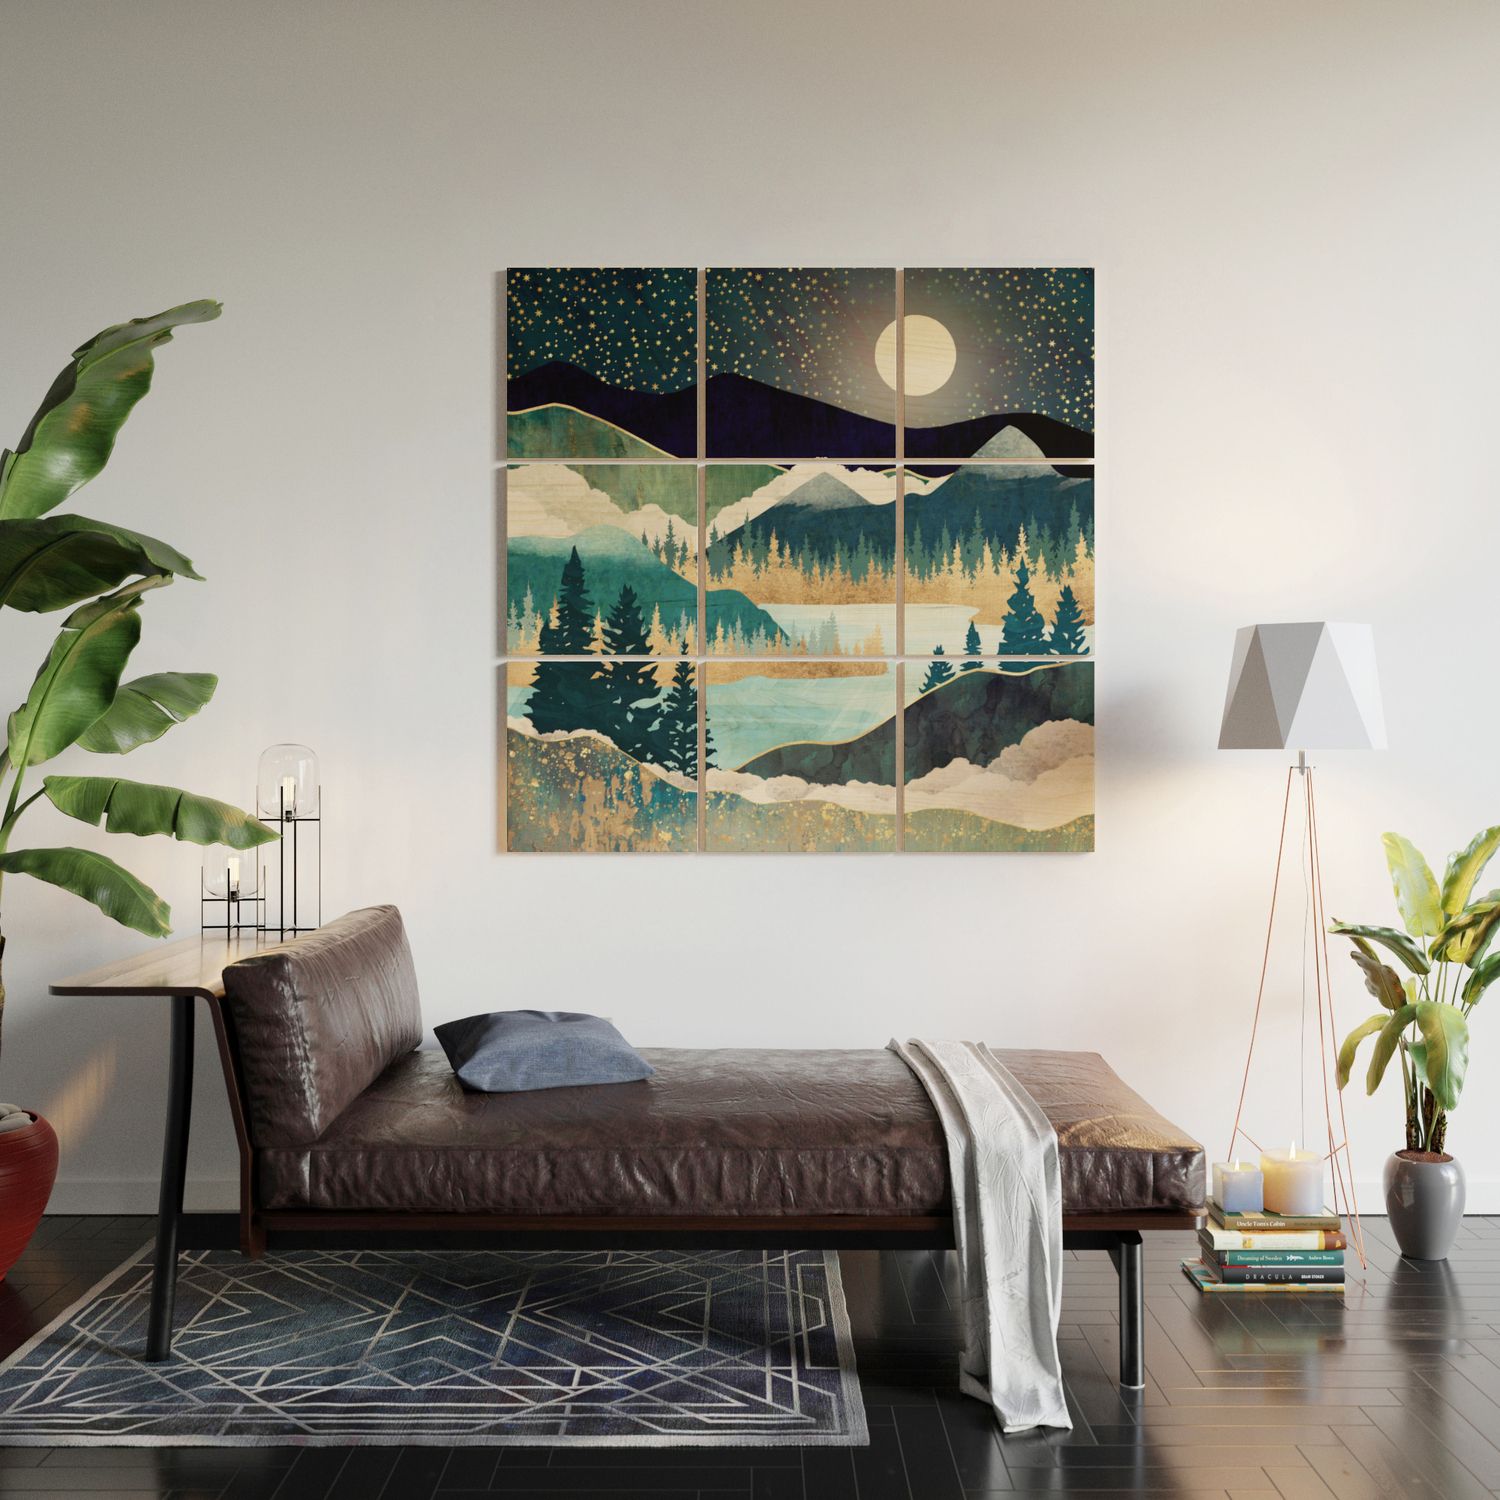 Star Lake Wood Wall Artspacefrogdesigns | Society6 Within Latest Star Lake Wall Art (View 6 of 20)